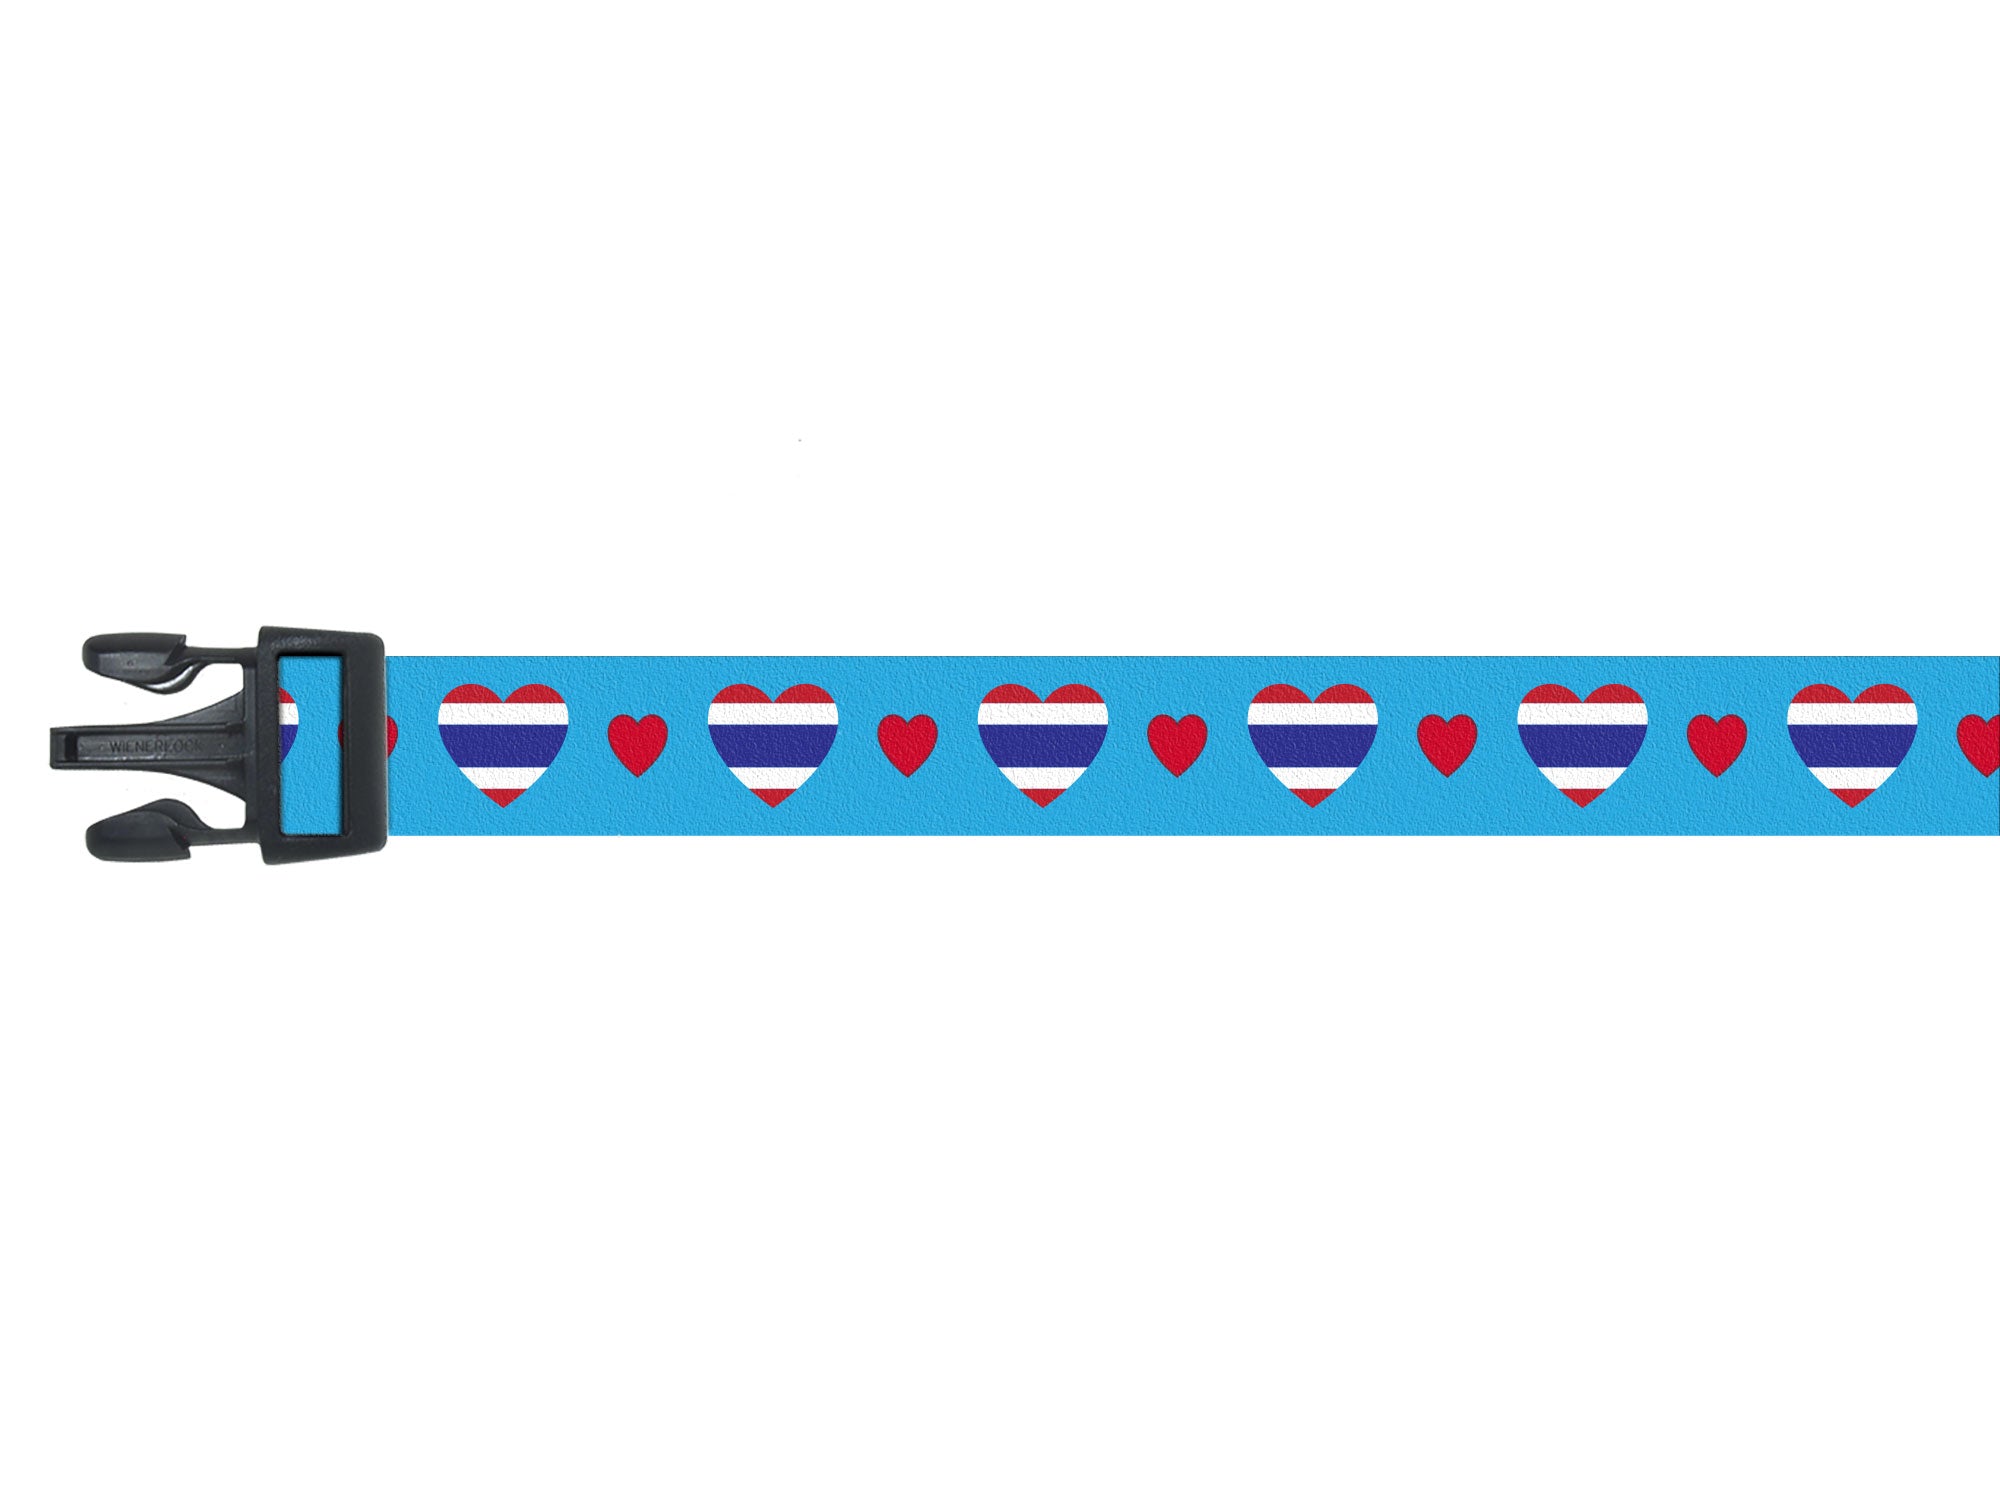 Dog Collar with Thailand Hearts Pattern in blue